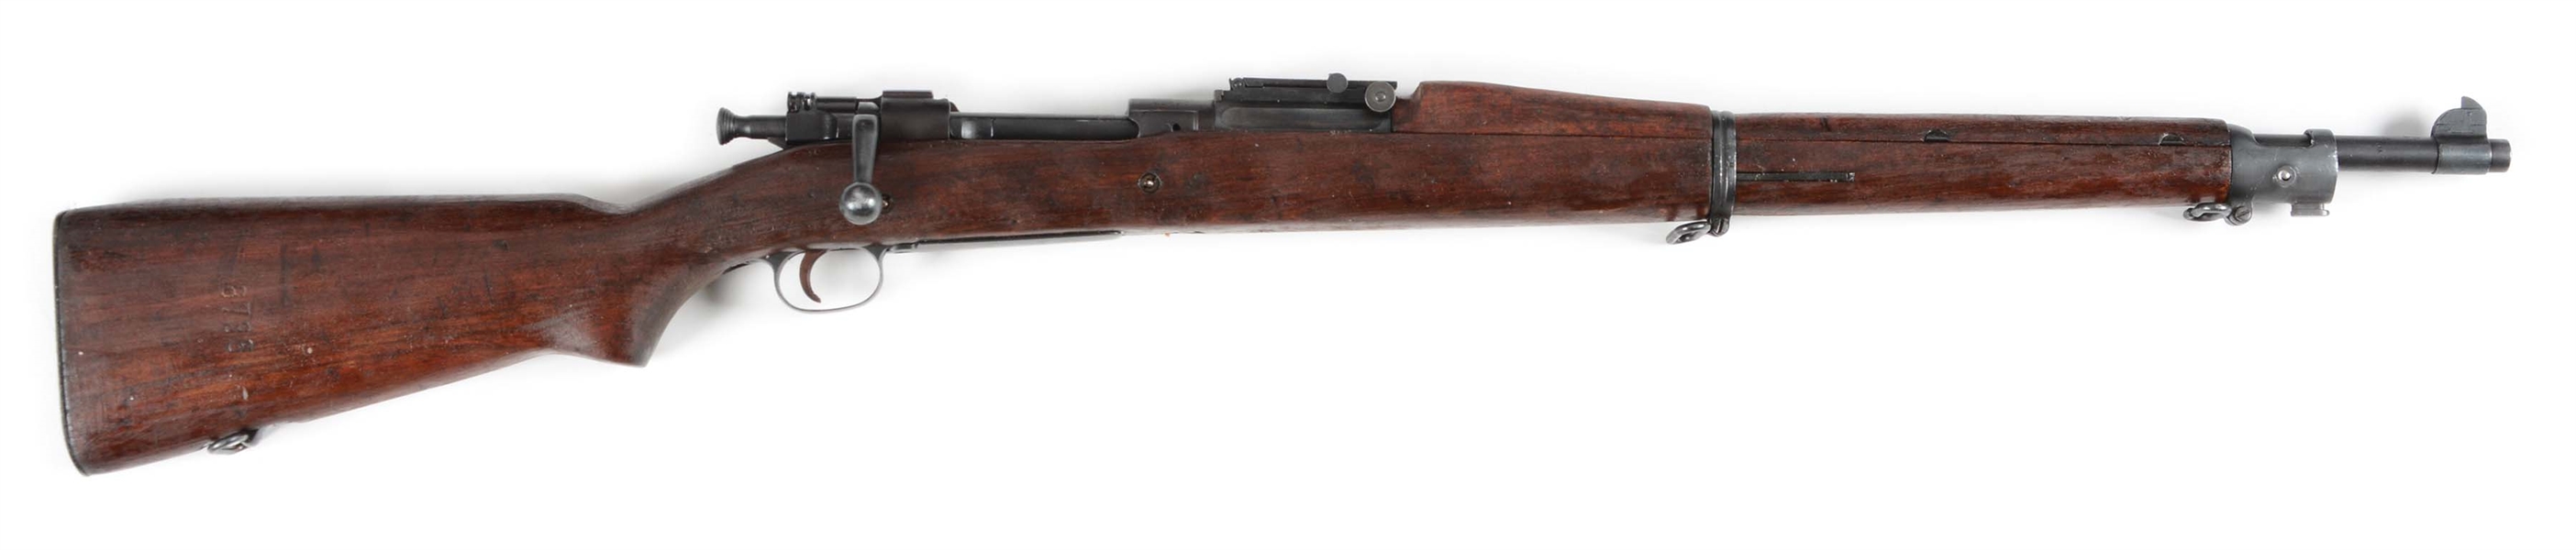 (C) SPRINGFIELD ARMORY 1903 BOLT ACTION RIFLE.